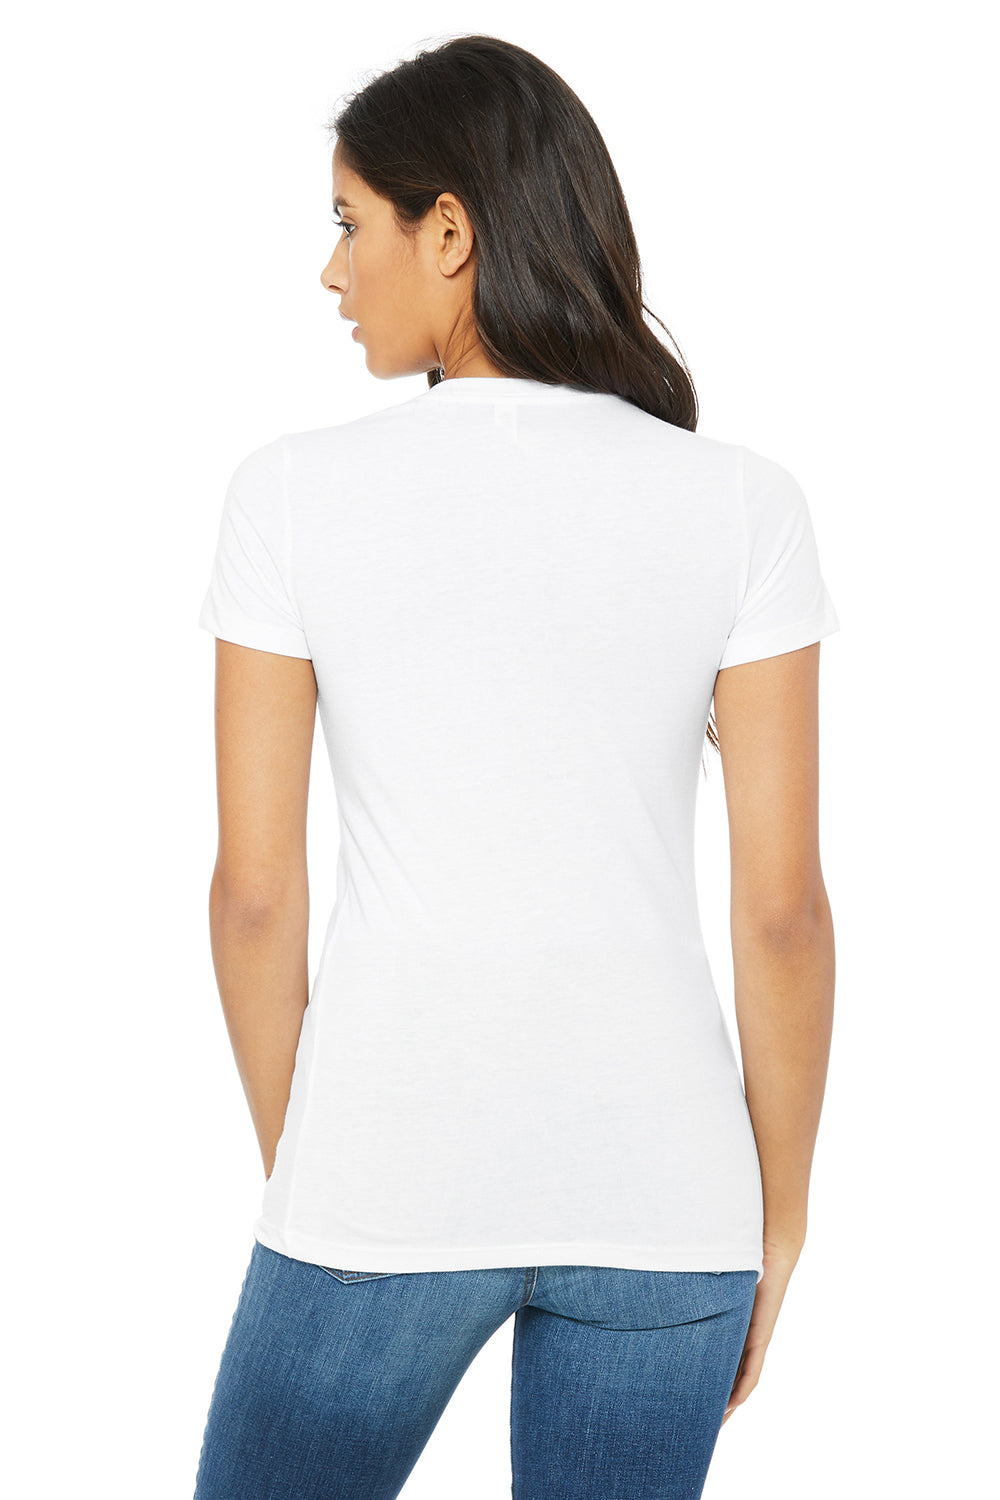 Bella + Canvas BC6004/6004 Womens The Favorite Short Sleeve Crewneck T-Shirt Solid White Model Back